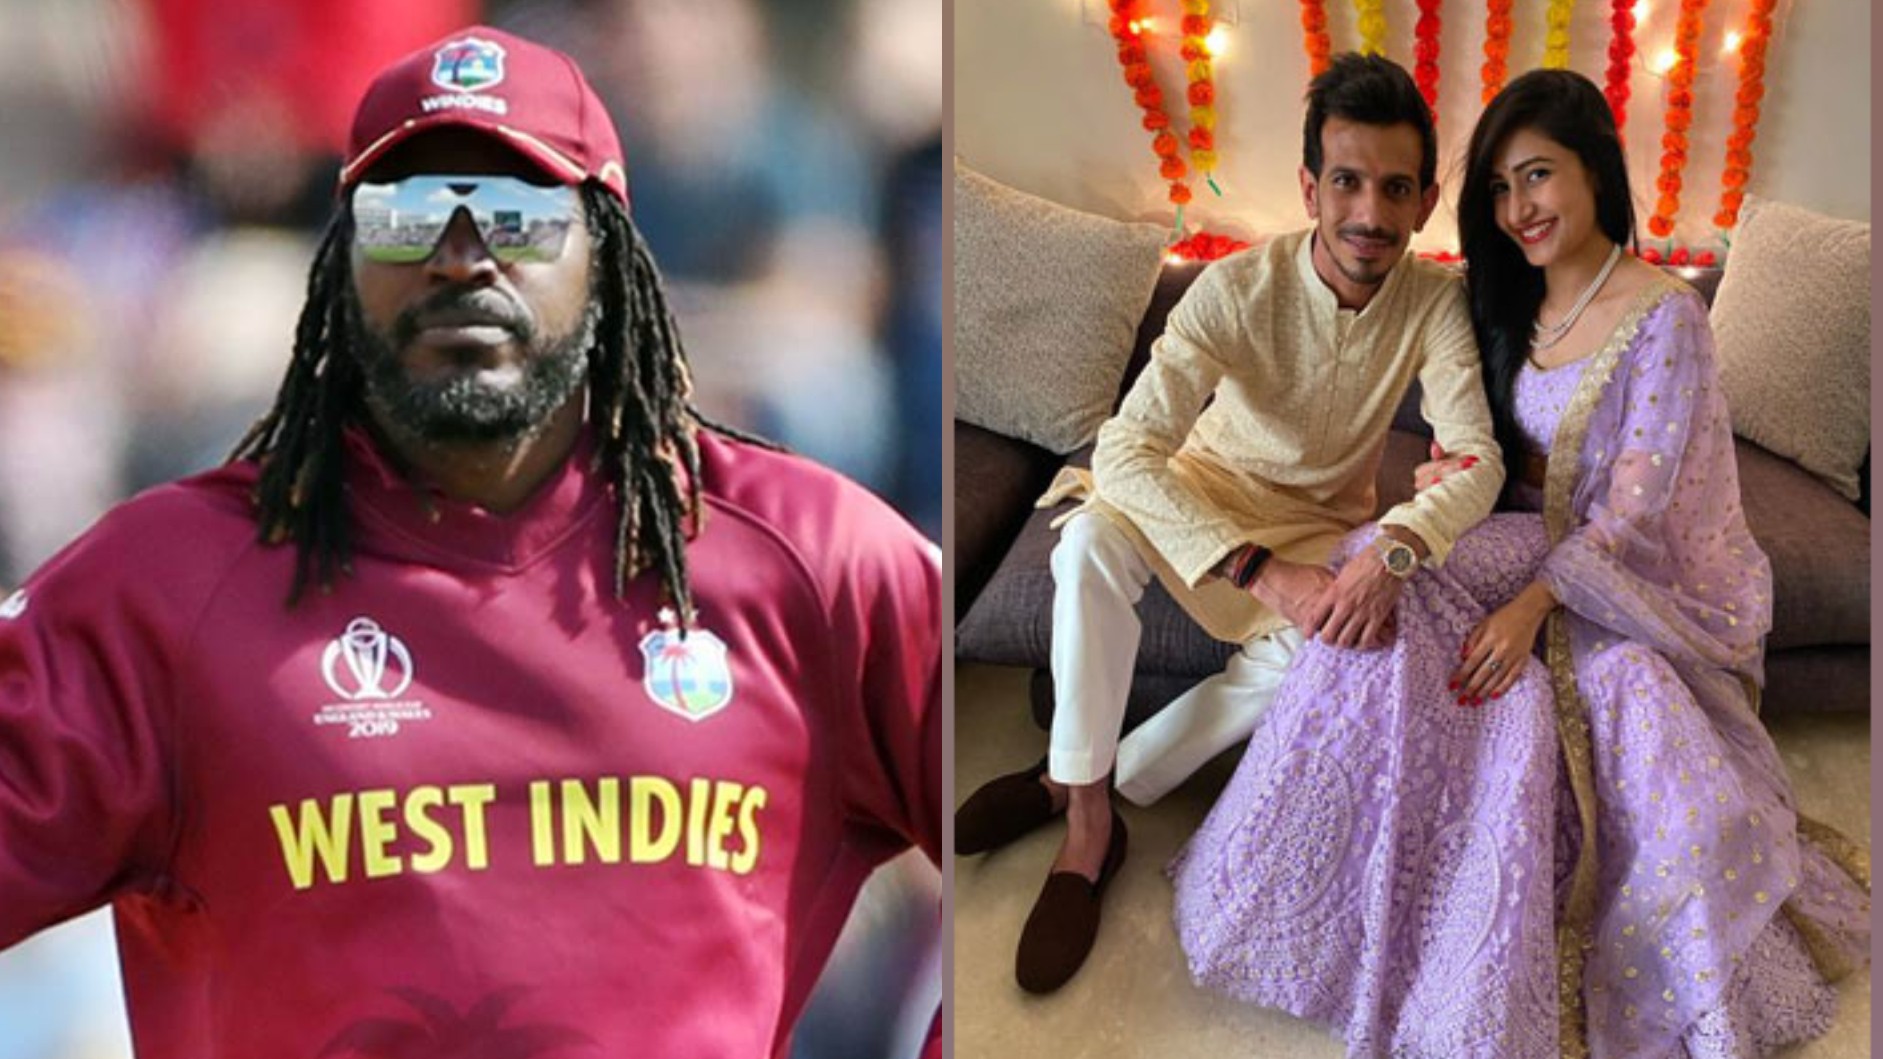 WATCH- “I'm gonna report your IG,” Chris Gayle reacts to Chahal and his fiancée Dhanashree’s video